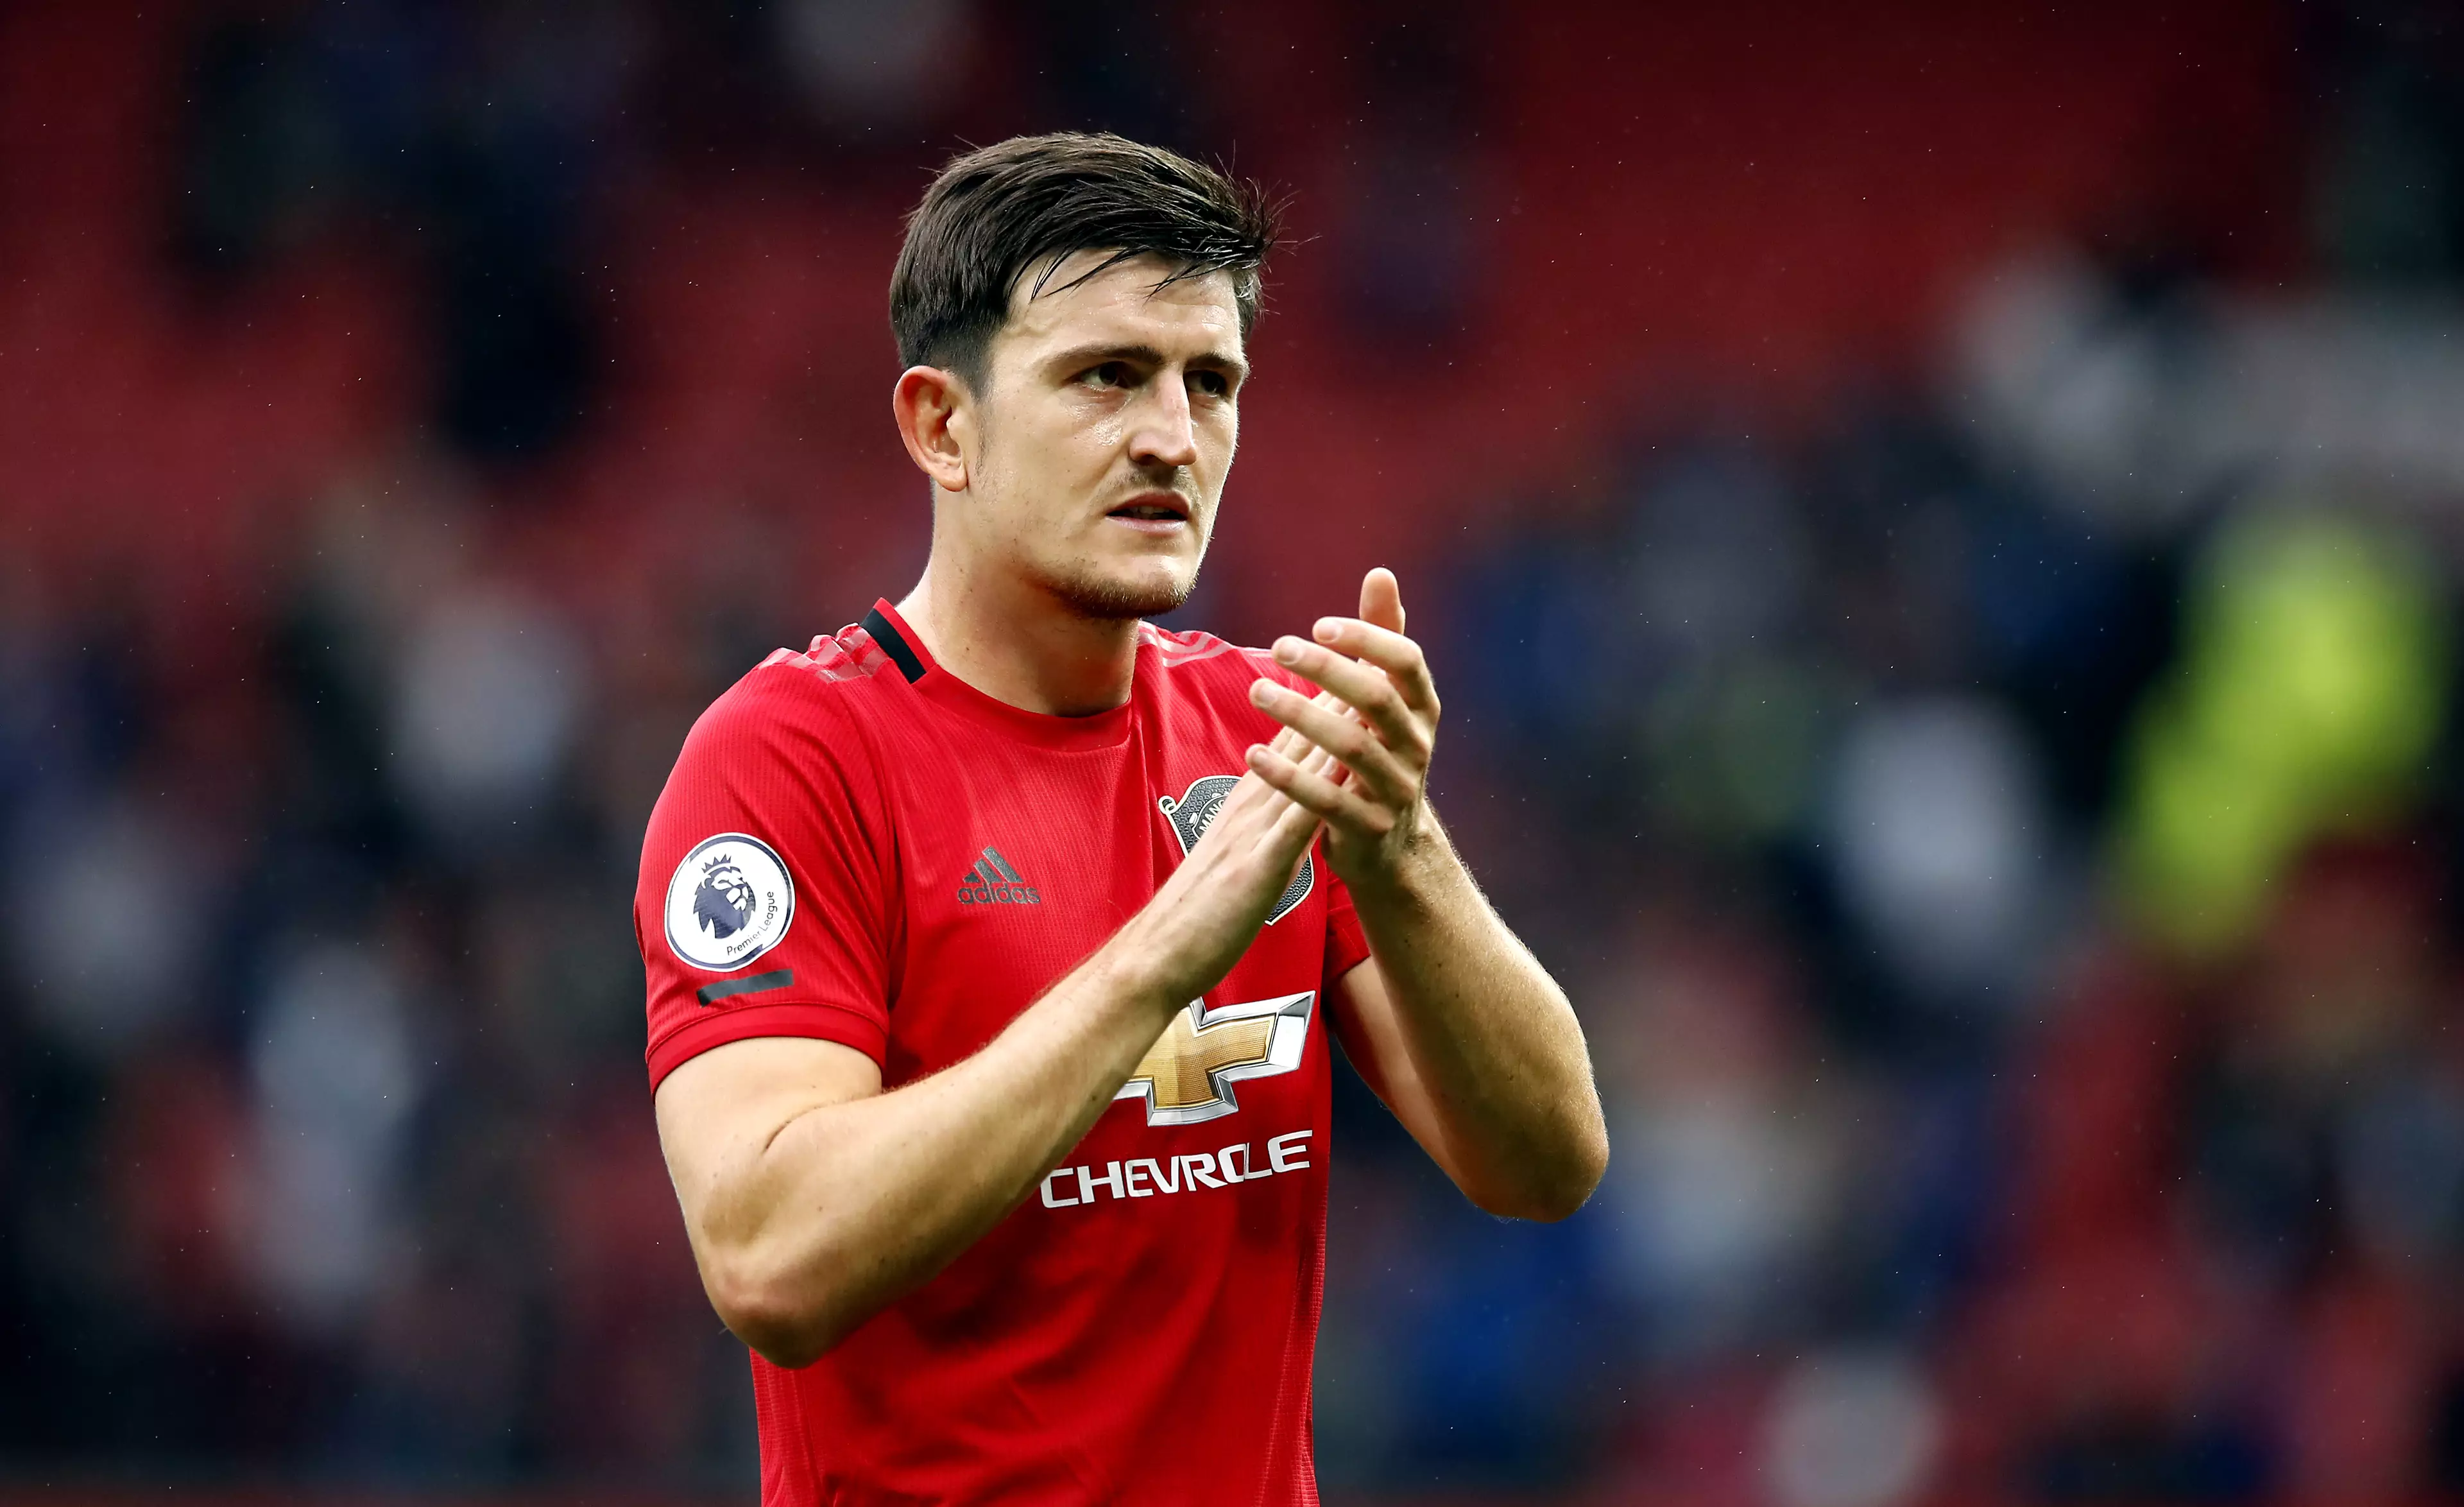 Harry Maguire was named man of the match on Sunday at Old Trafford